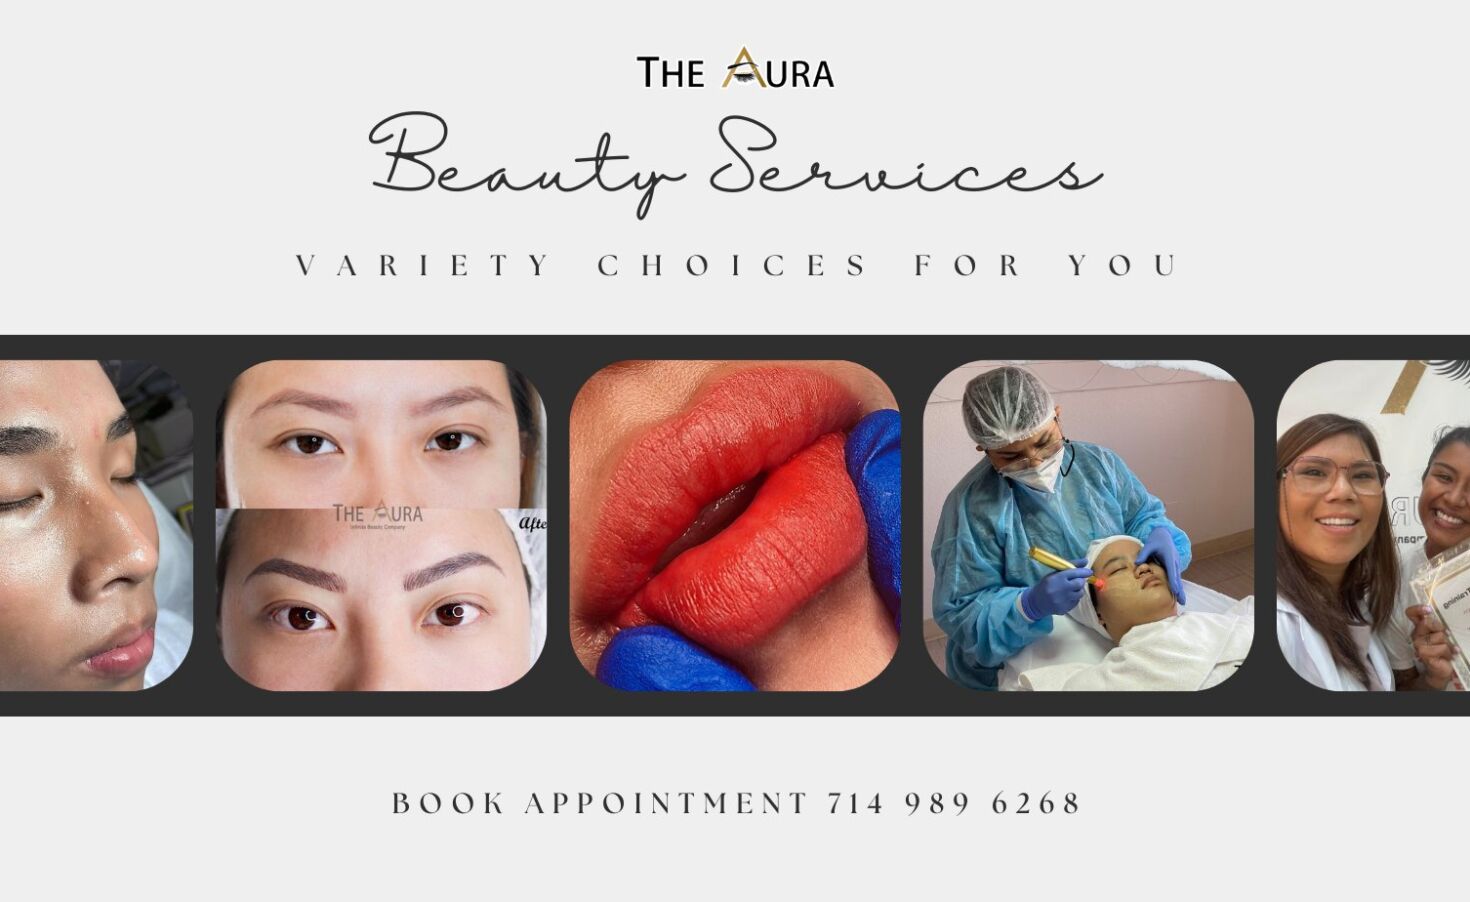 Let us take care of your beauty! Let your natural beauty shine!✨